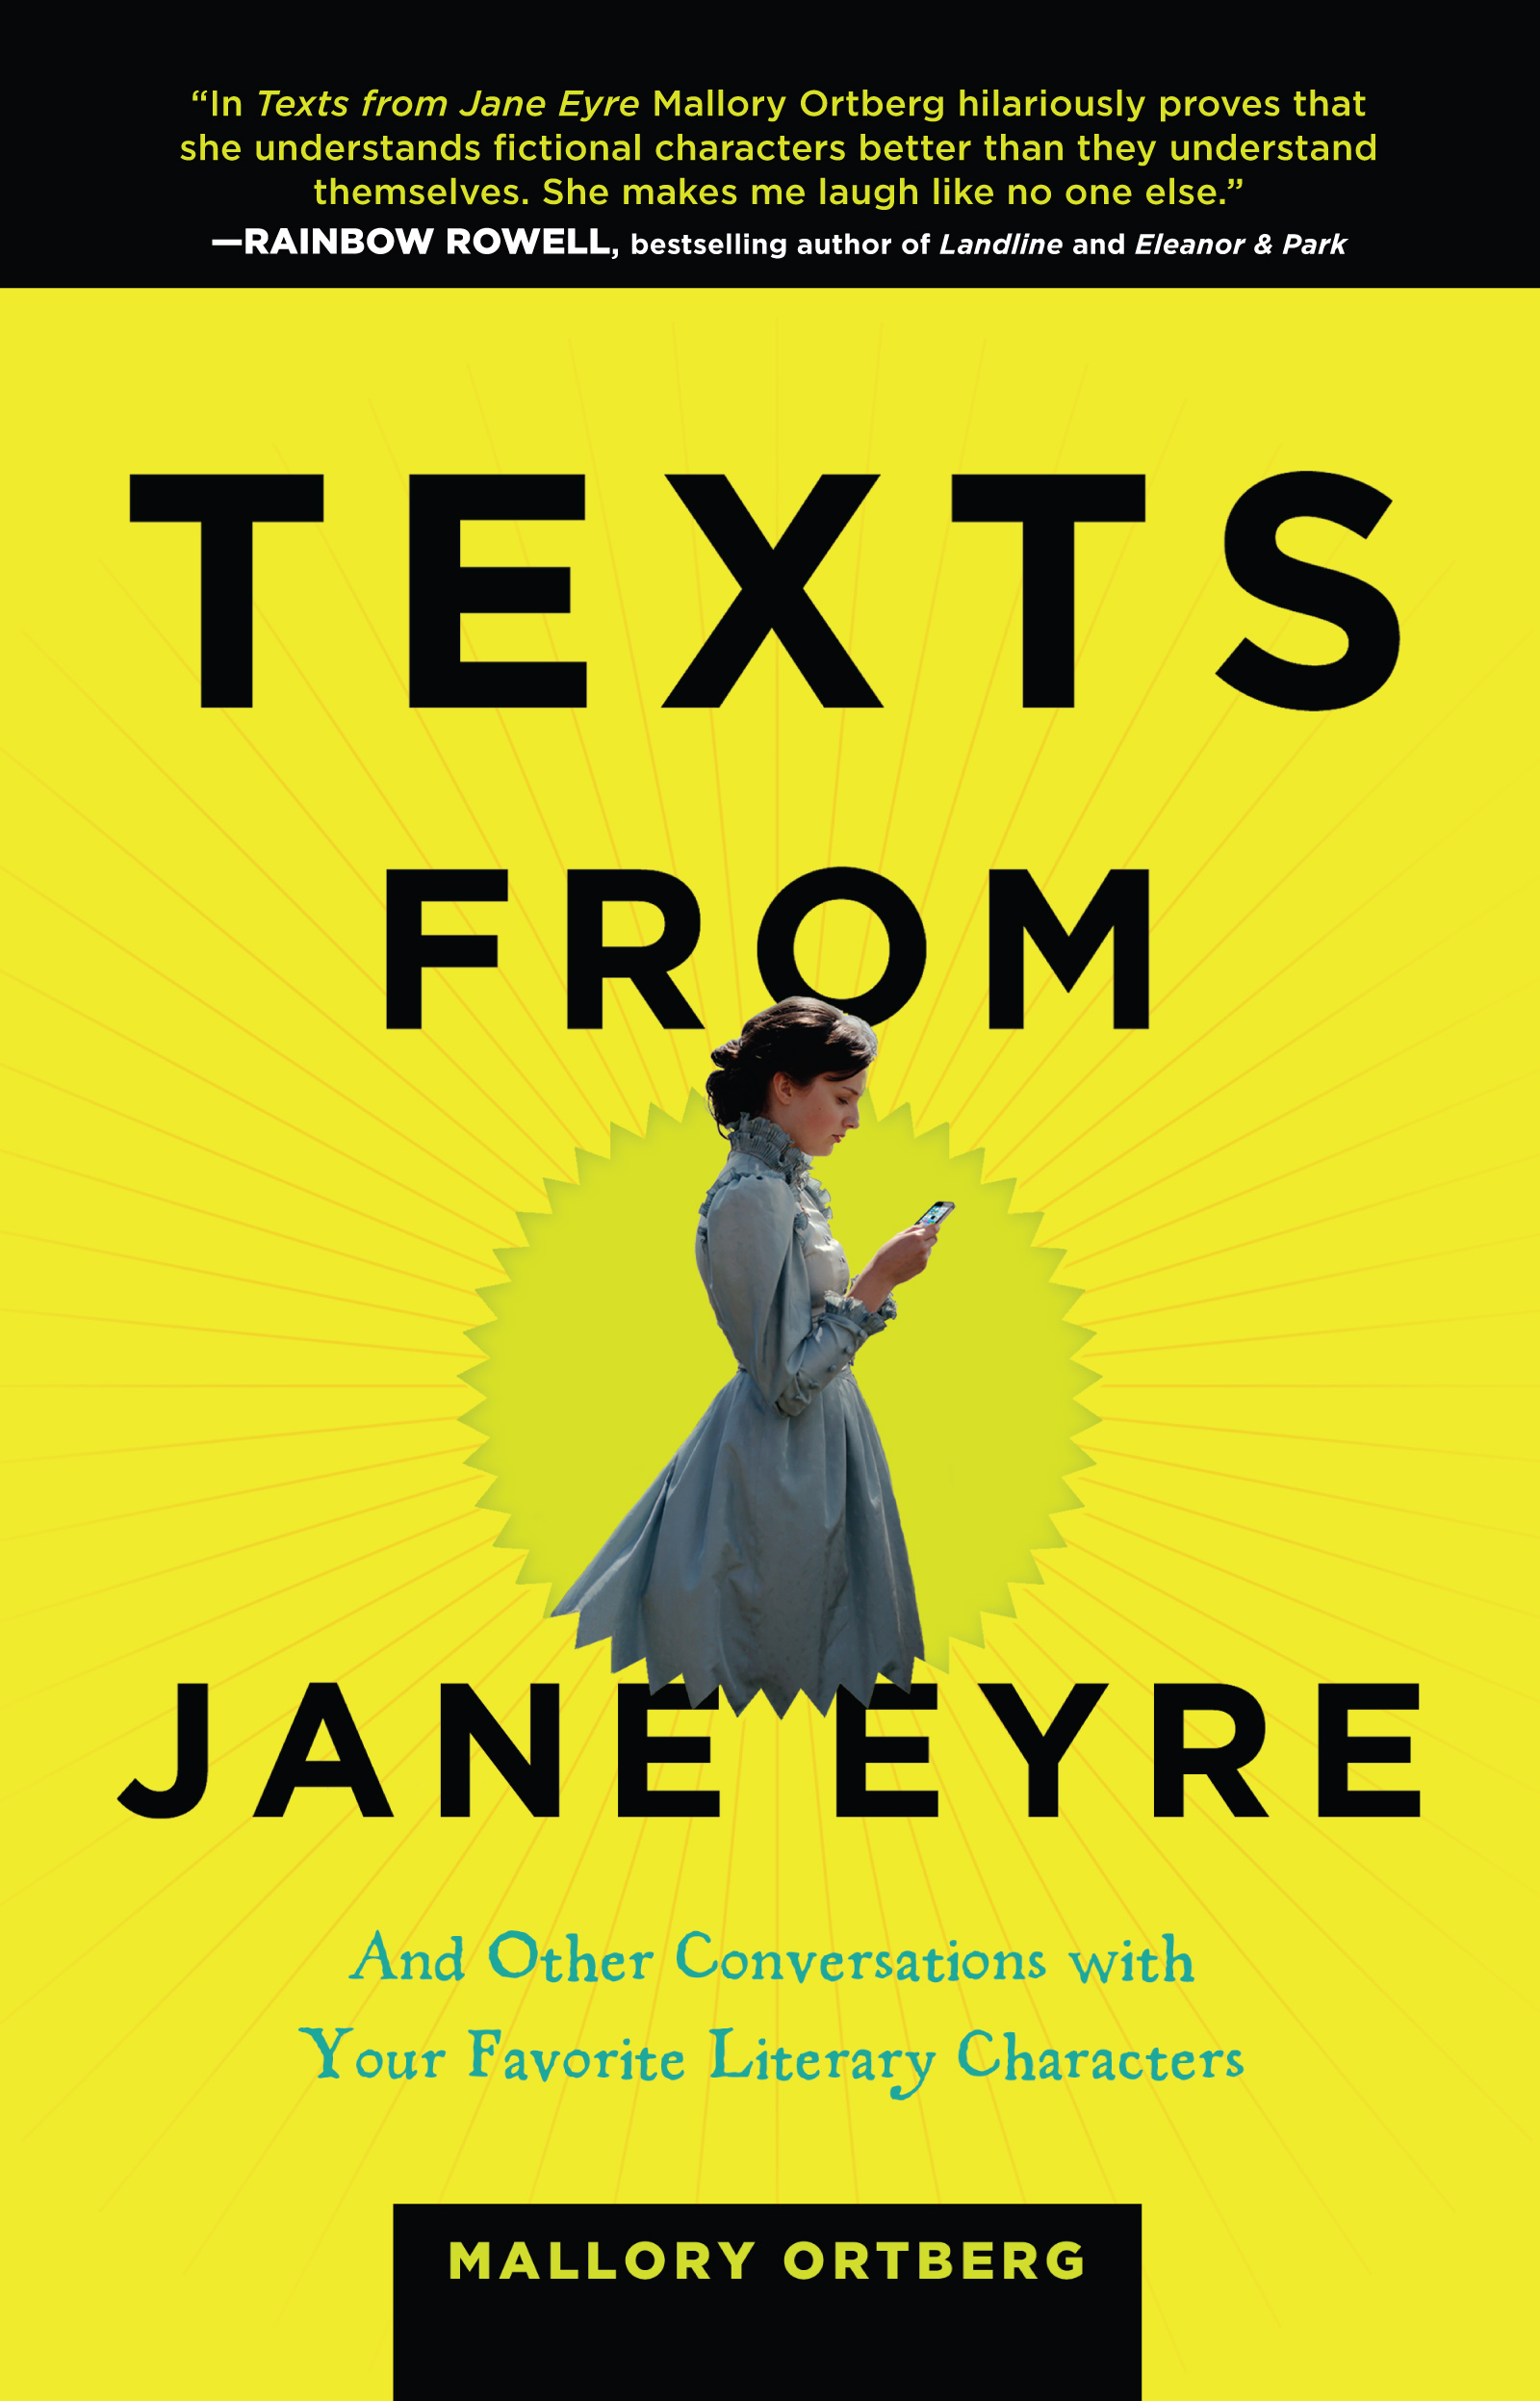 jane eyre book review